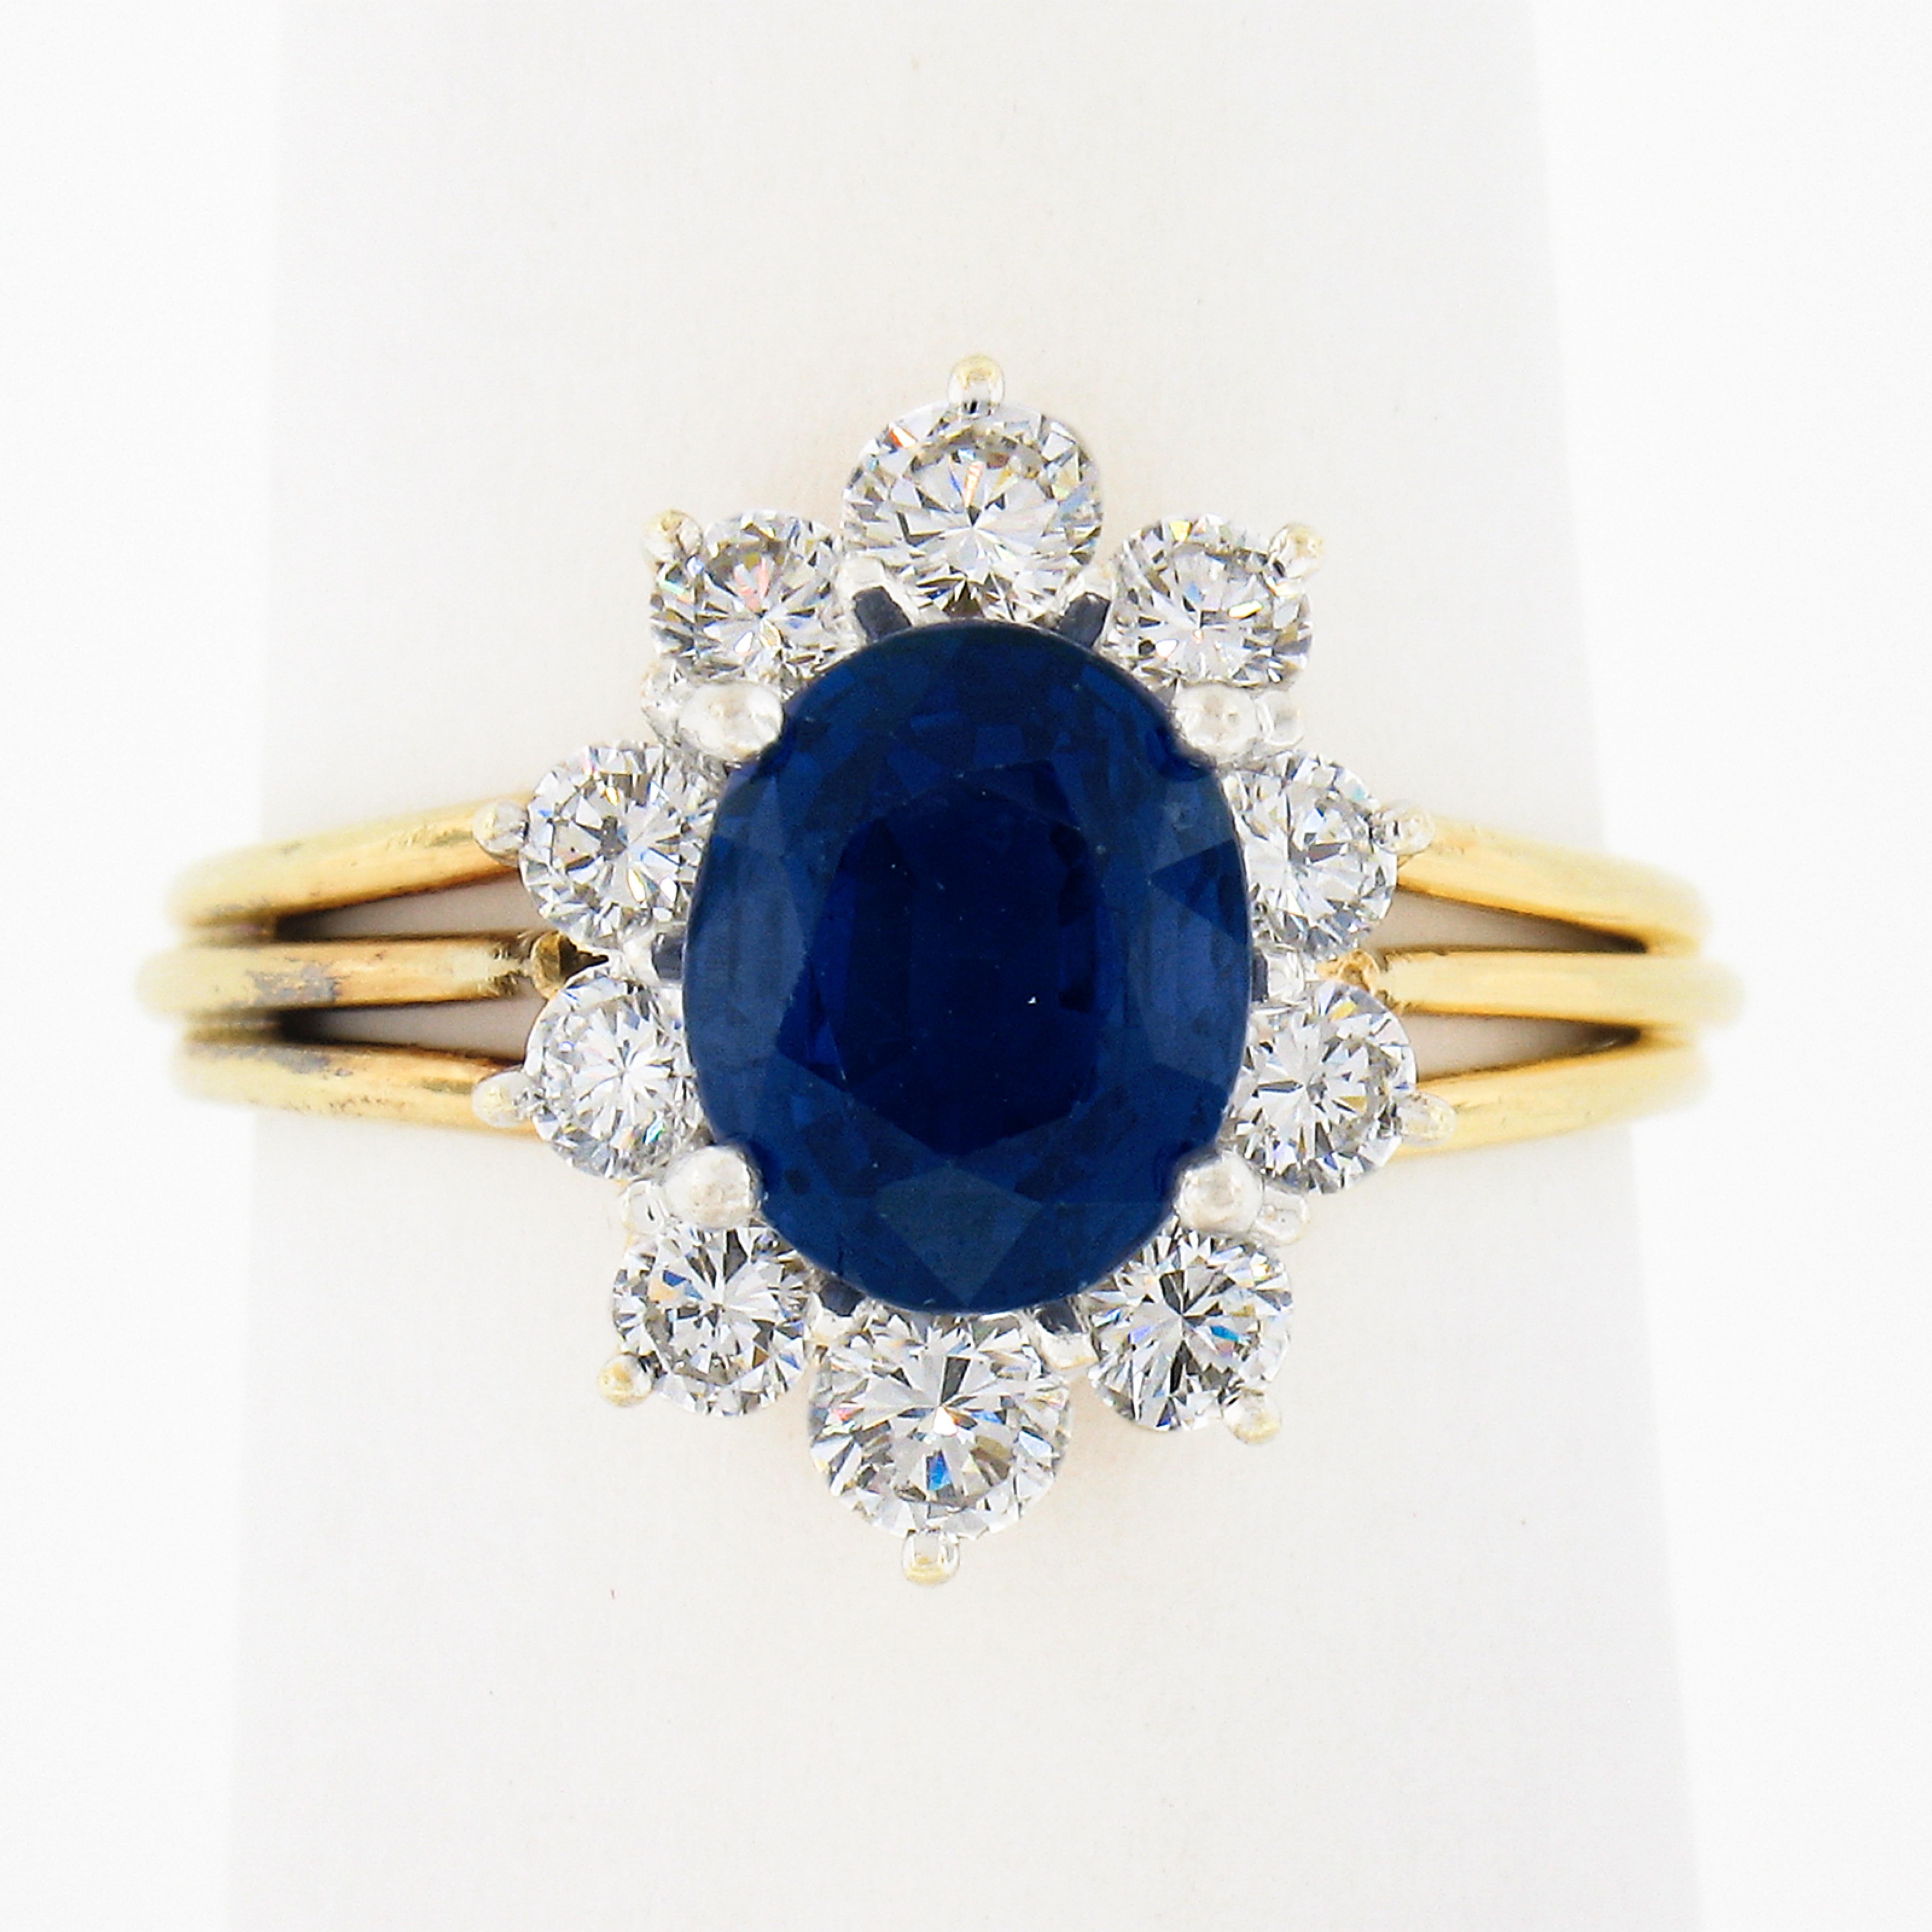 This magnificent sapphire and diamond cocktail ring is crafted in solid 18k gold and features a truly mesmerizing and vibrant oval blue sapphire solitaire at its center which has been certified by GIA as being originated from Burma. Its exceptional